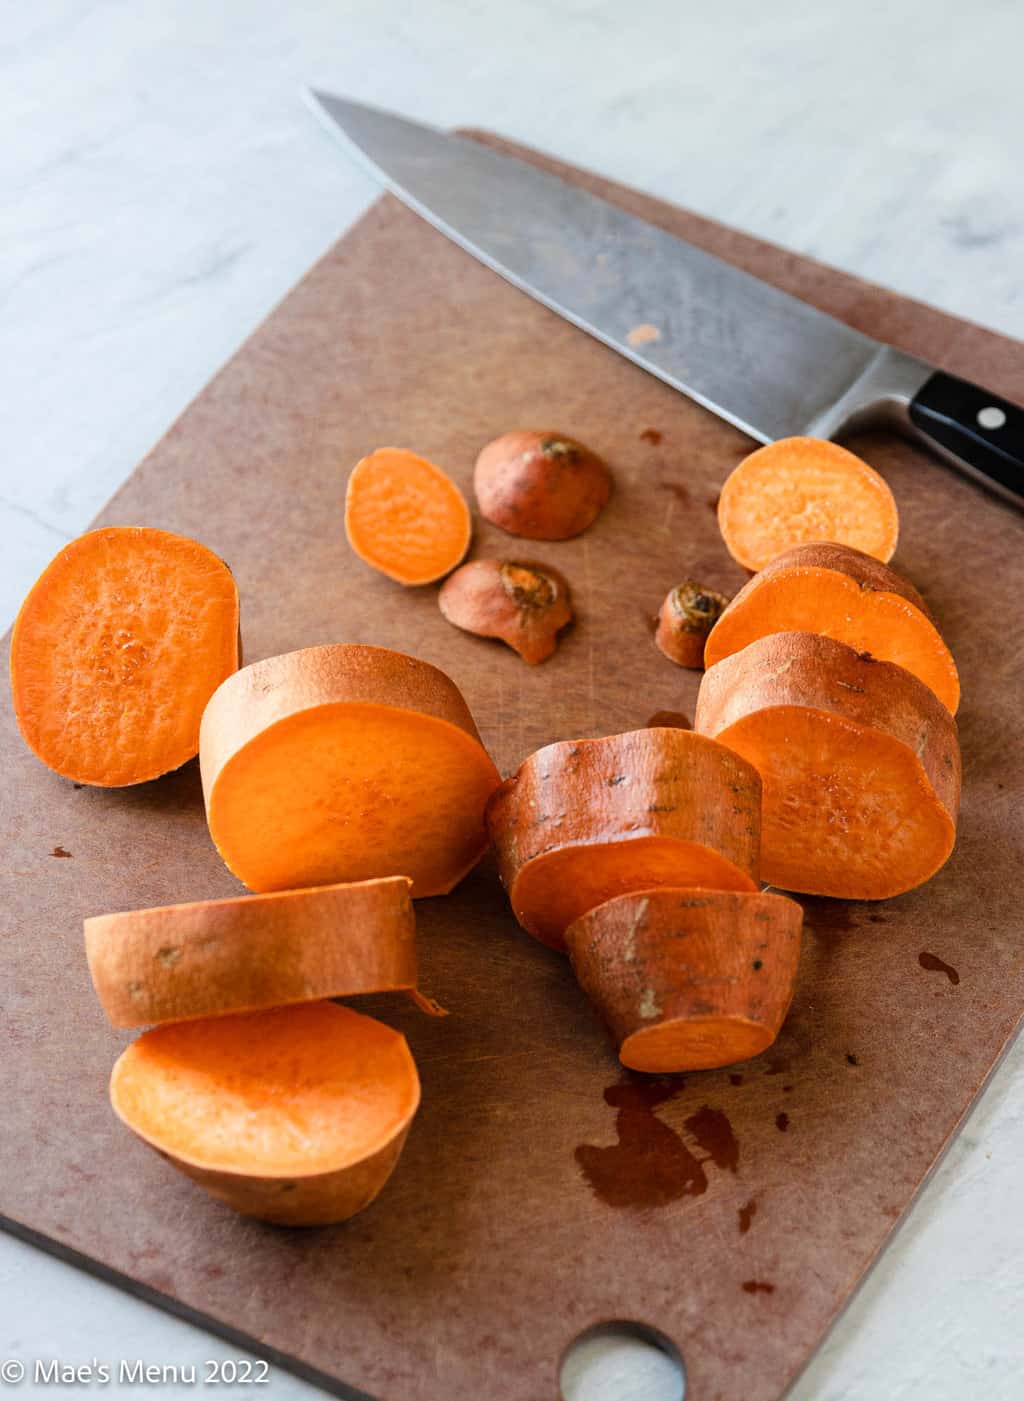 Sliced up sweet potatoes on a cutting board.